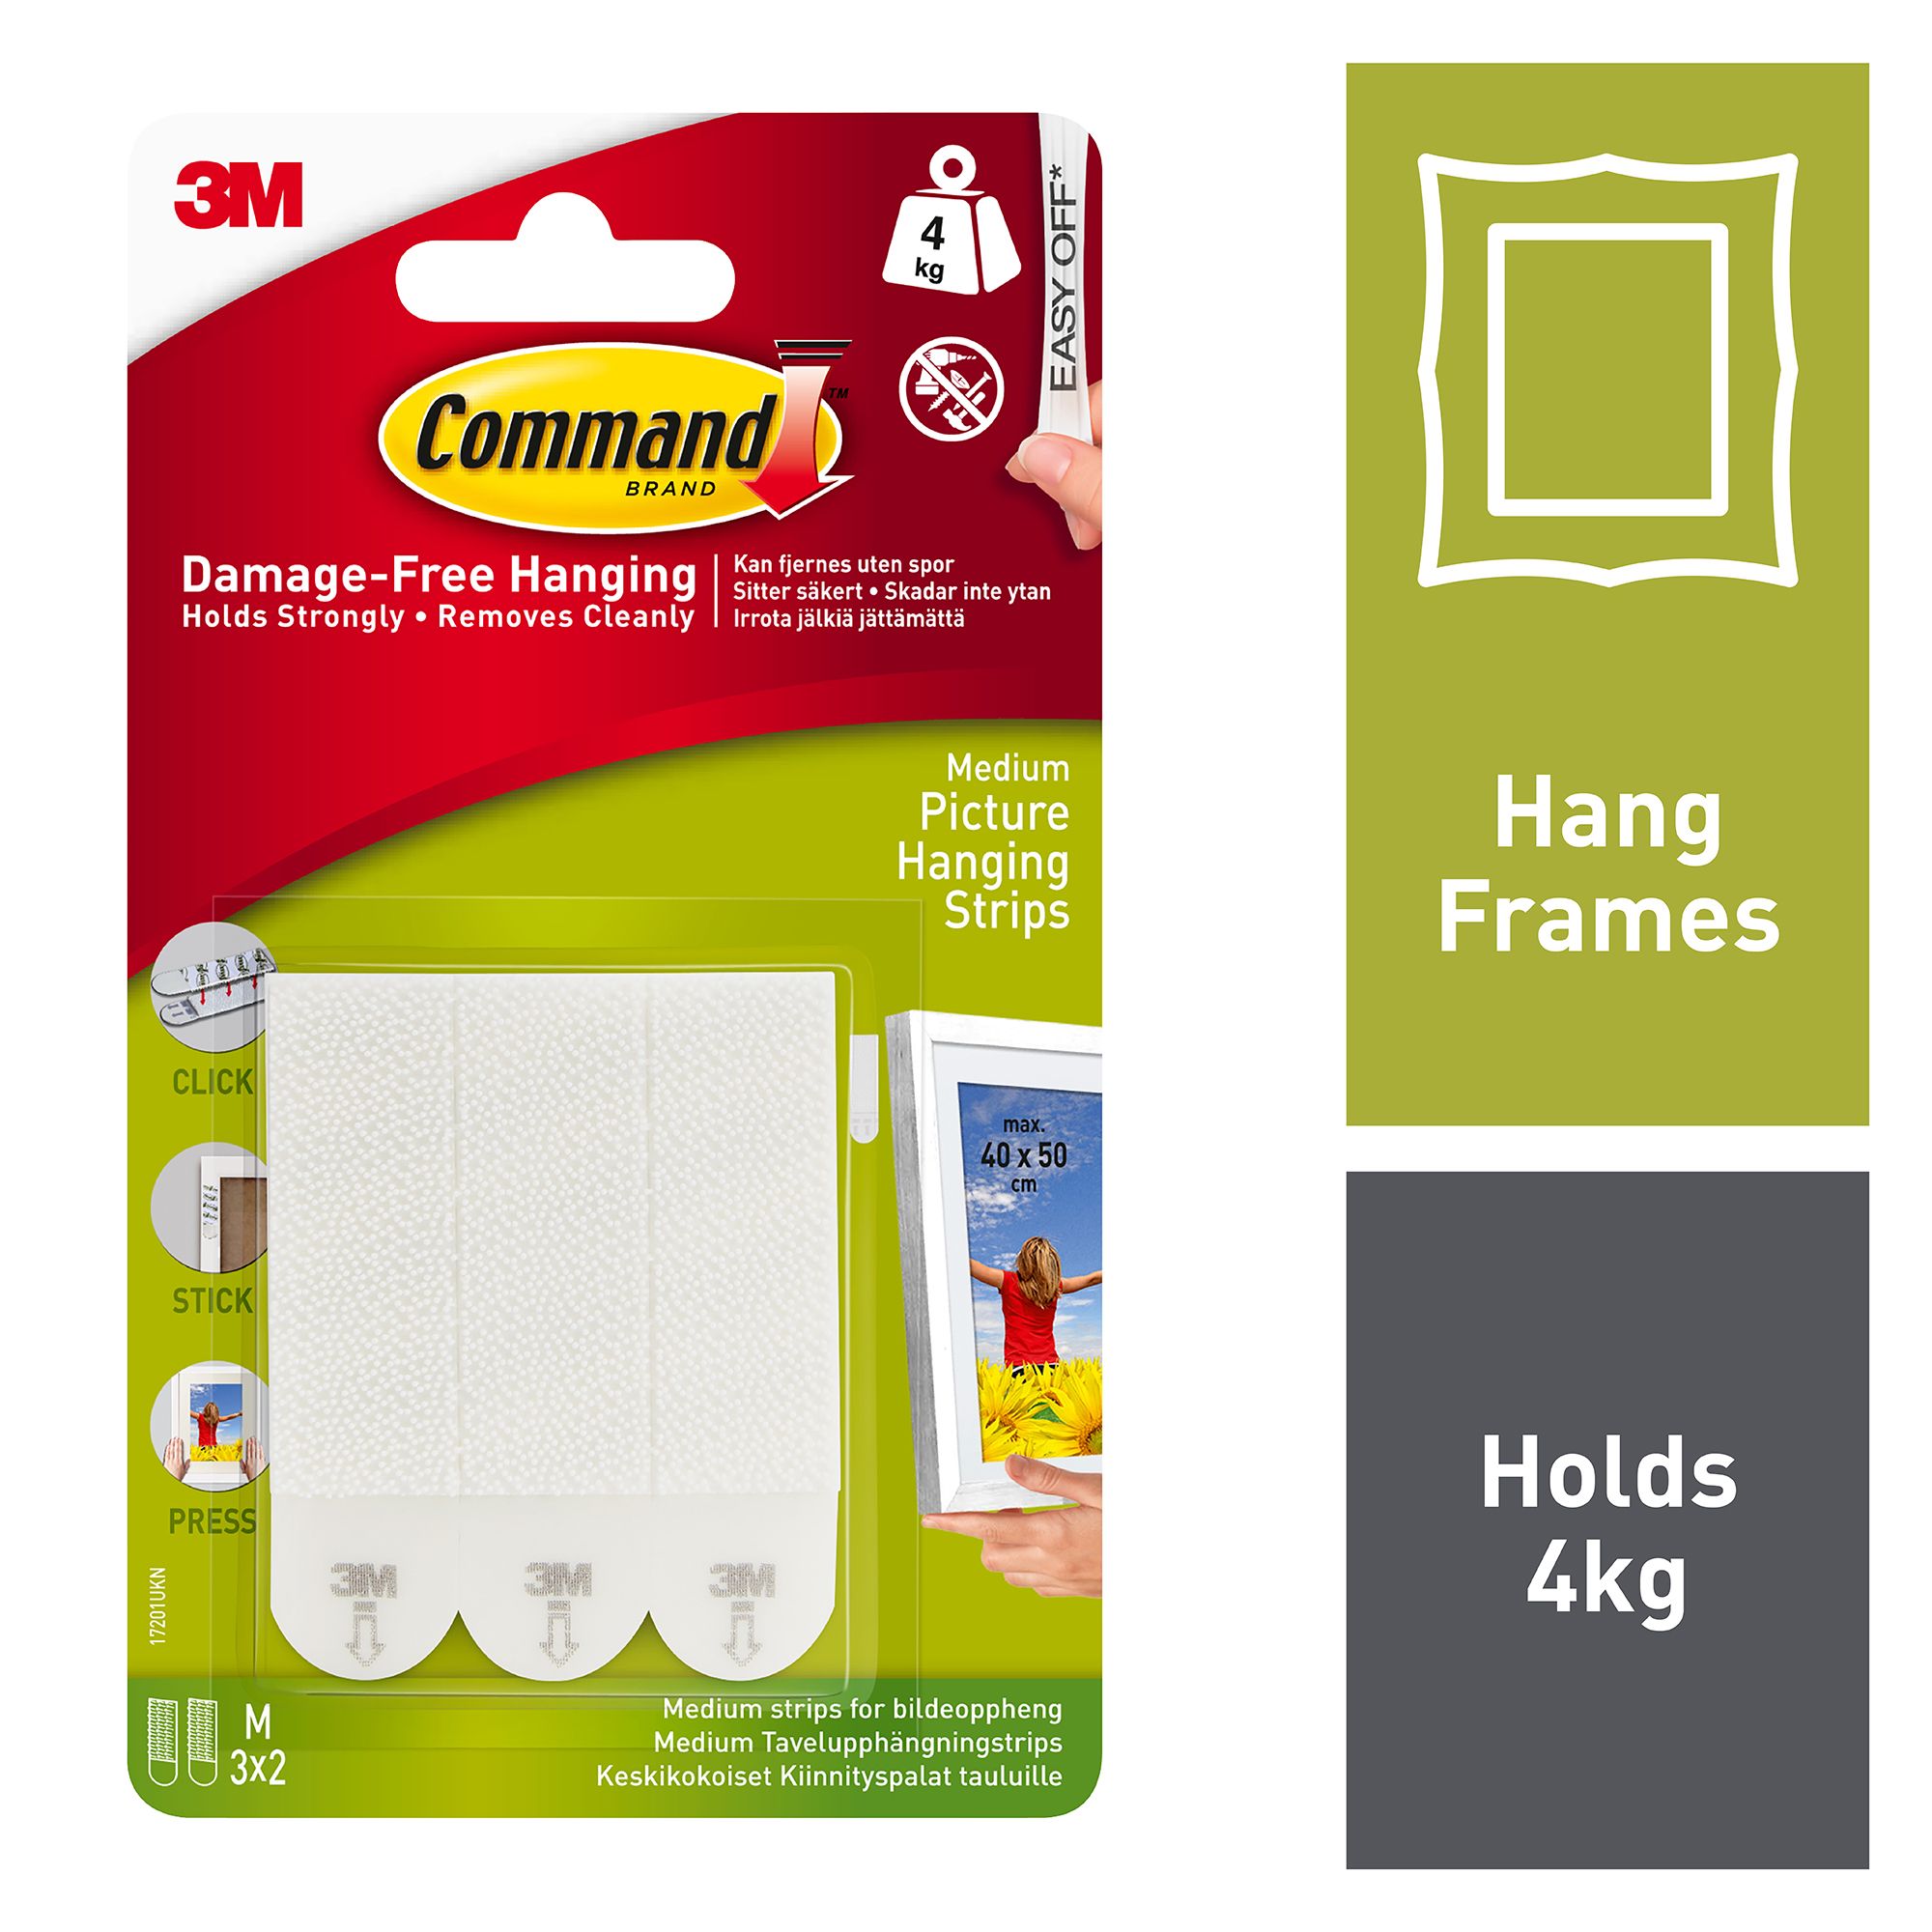 3M Command Medium White Picture hanging Adhesive strip (Holds)4kg, Pack of 3